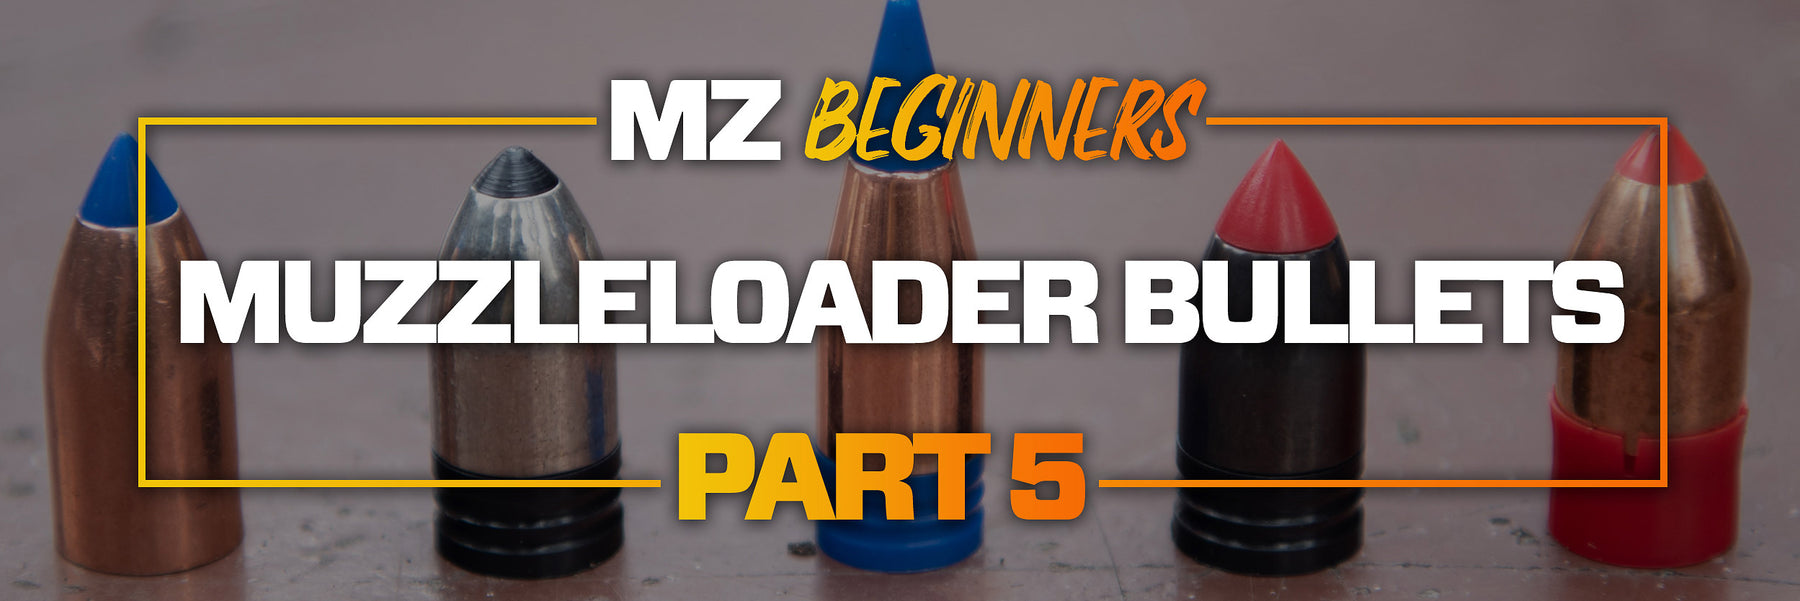 Beginners Guide To Muzzle-Loading, Part 5